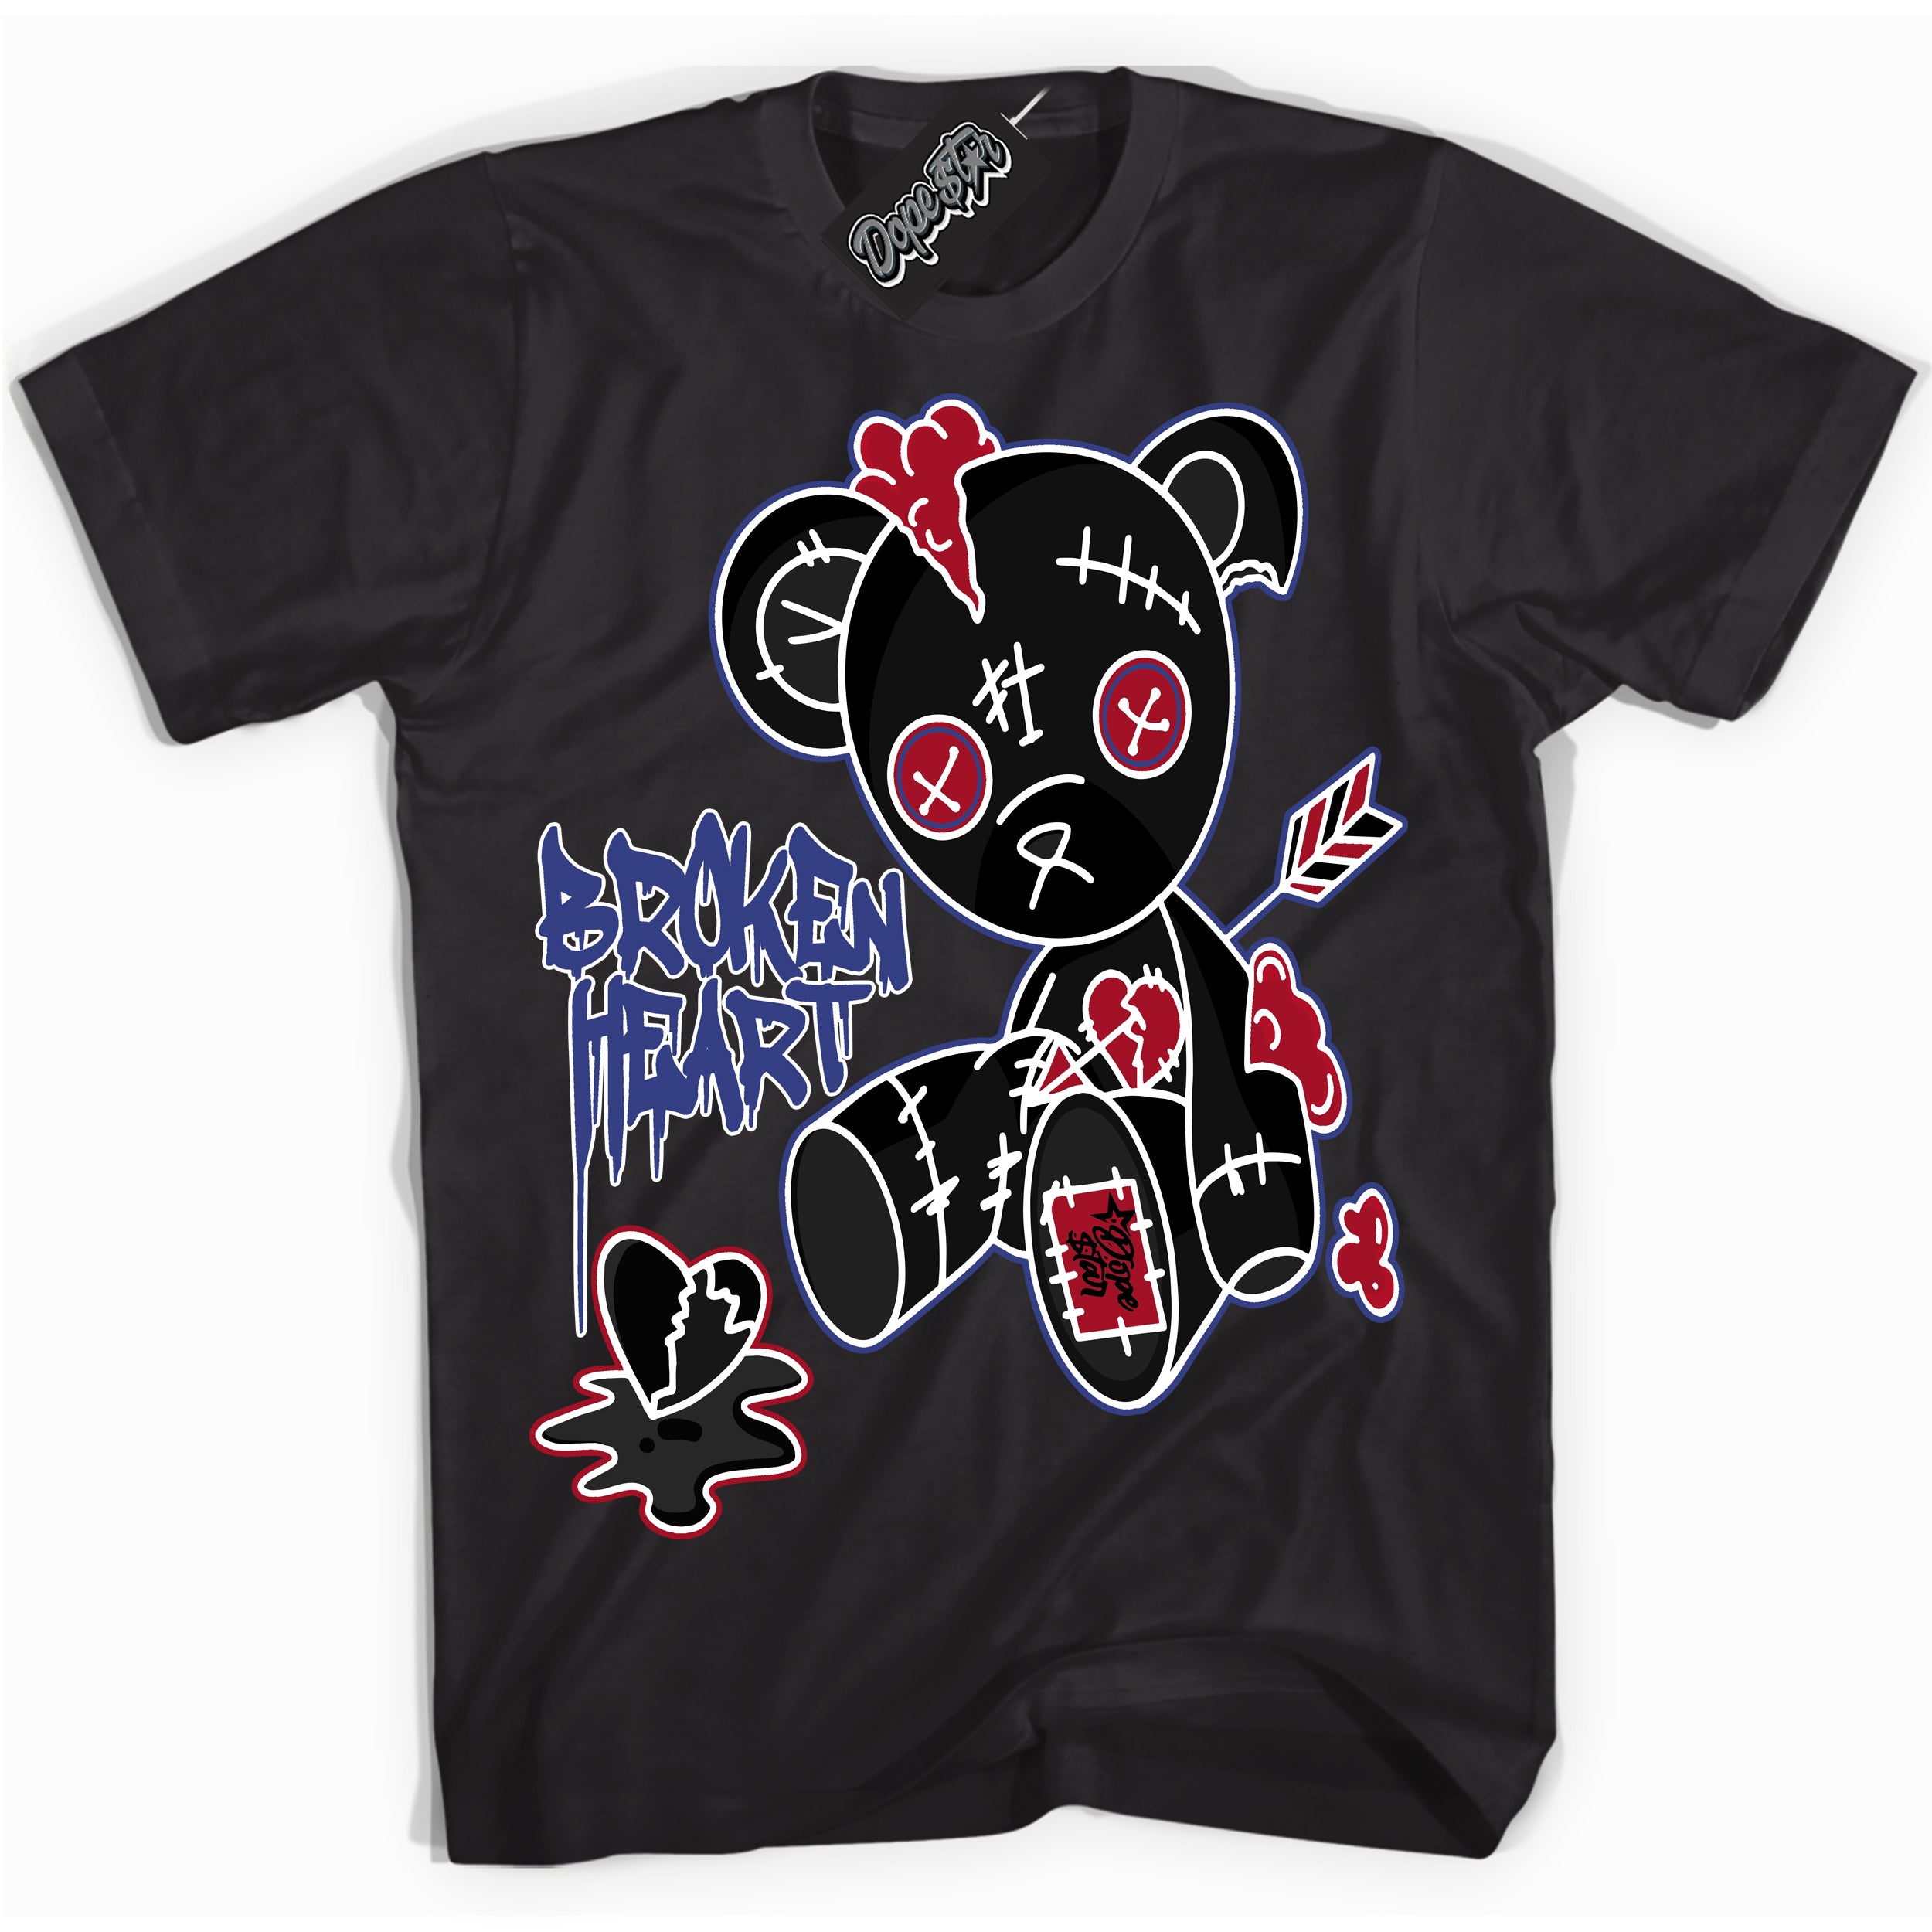 Cool Black Shirt with “ Broken Heart Bear ” design that perfectly matches Playoffs 8s Sneakers.